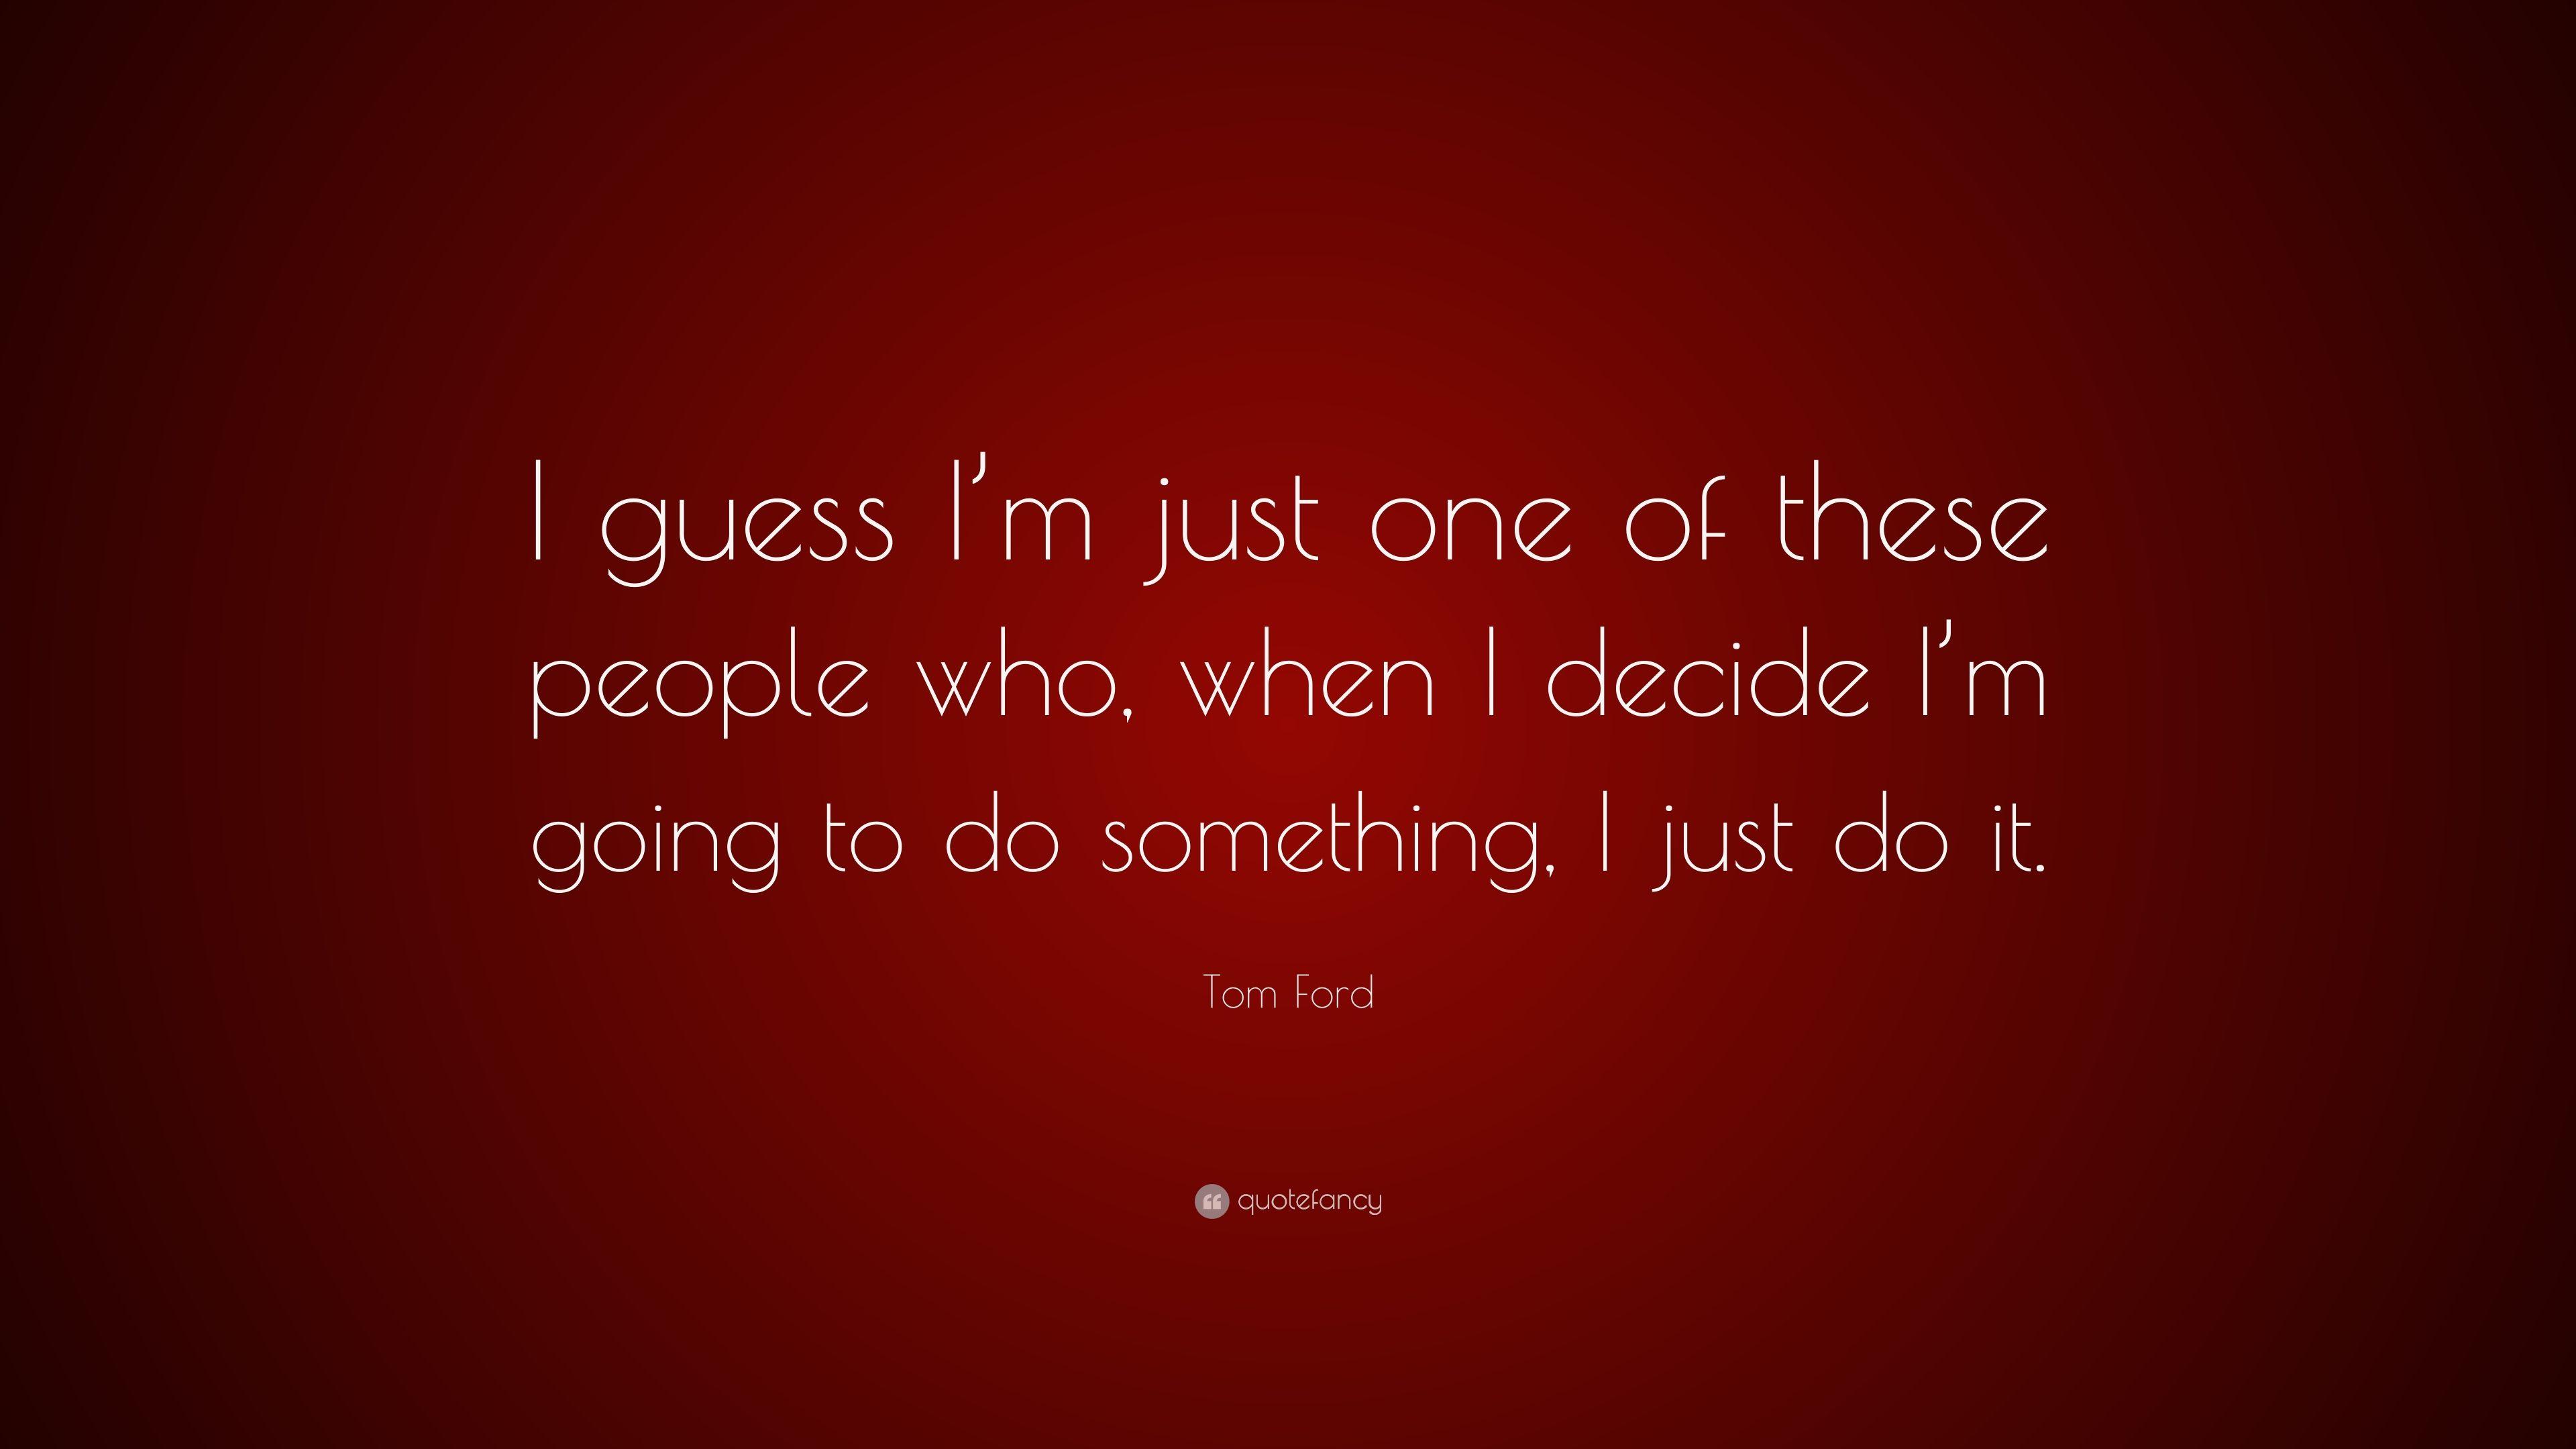 Tom Ford Quote: “I guess I'm just one of these people who, when I